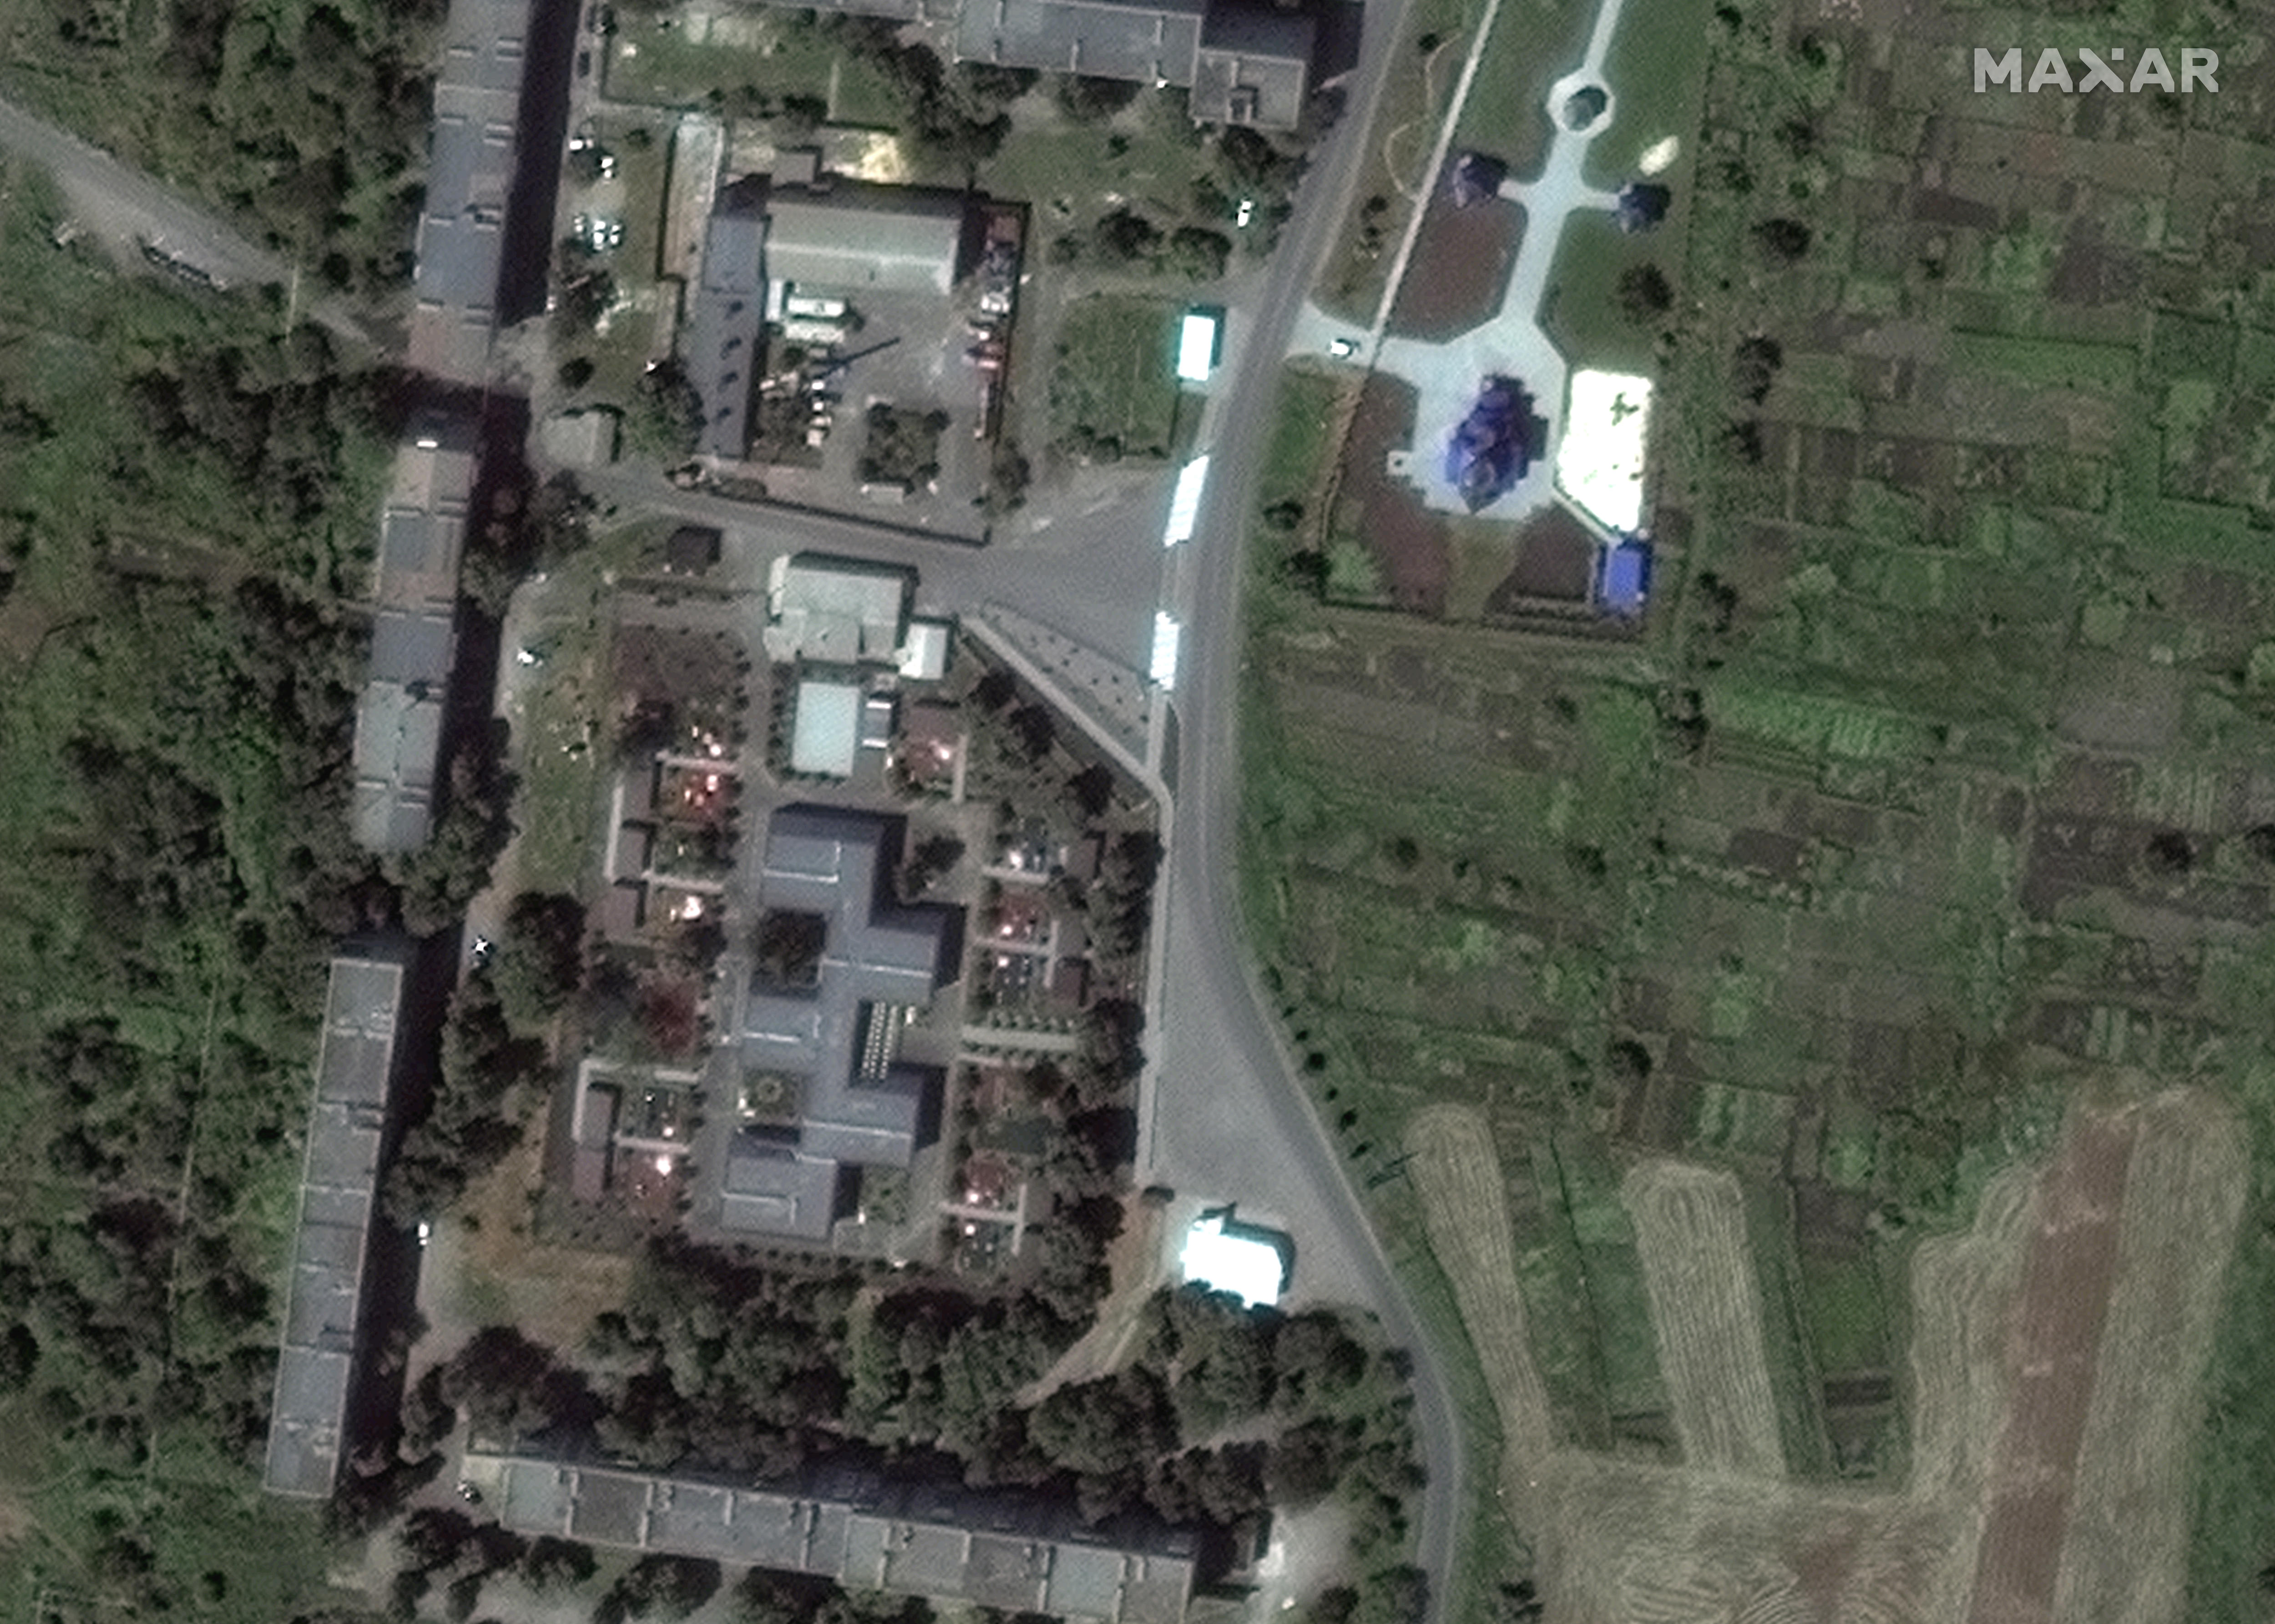 Satellite image of Apartment complex and church.